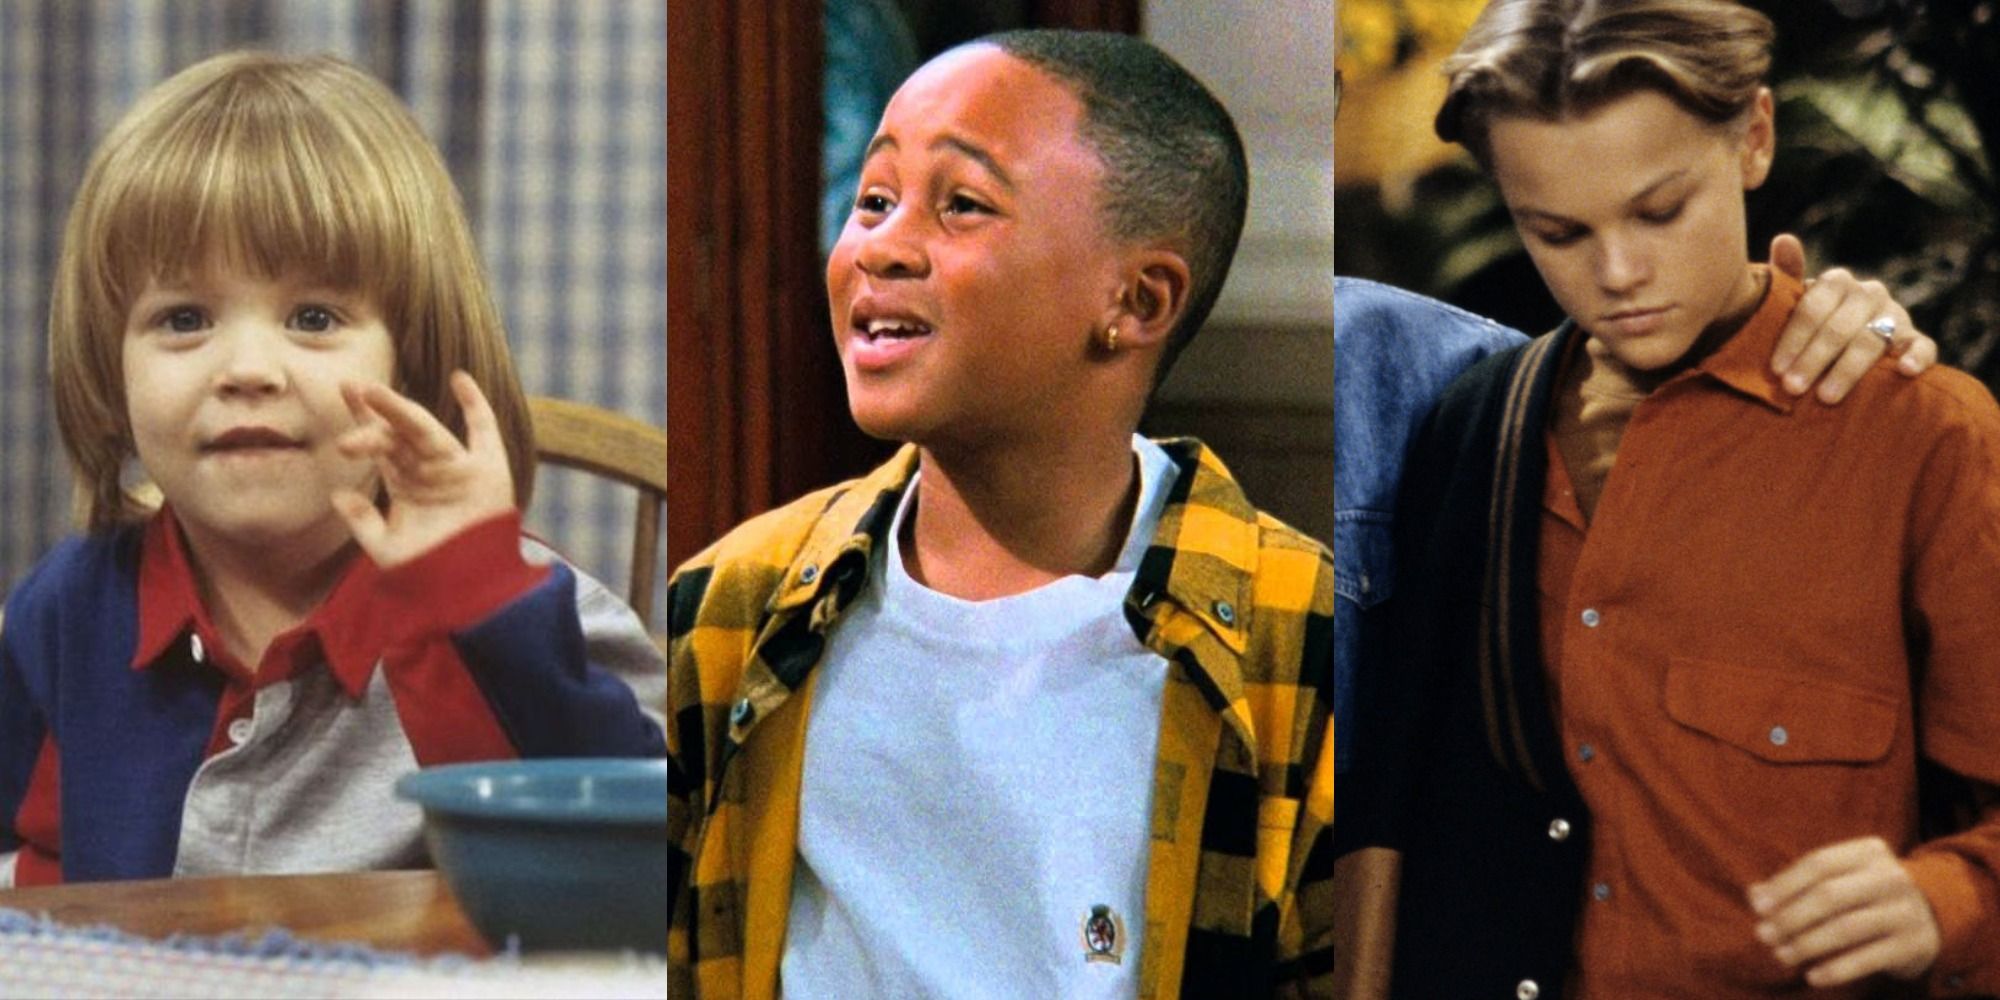 A split image of late addition child actors in major sitcoms